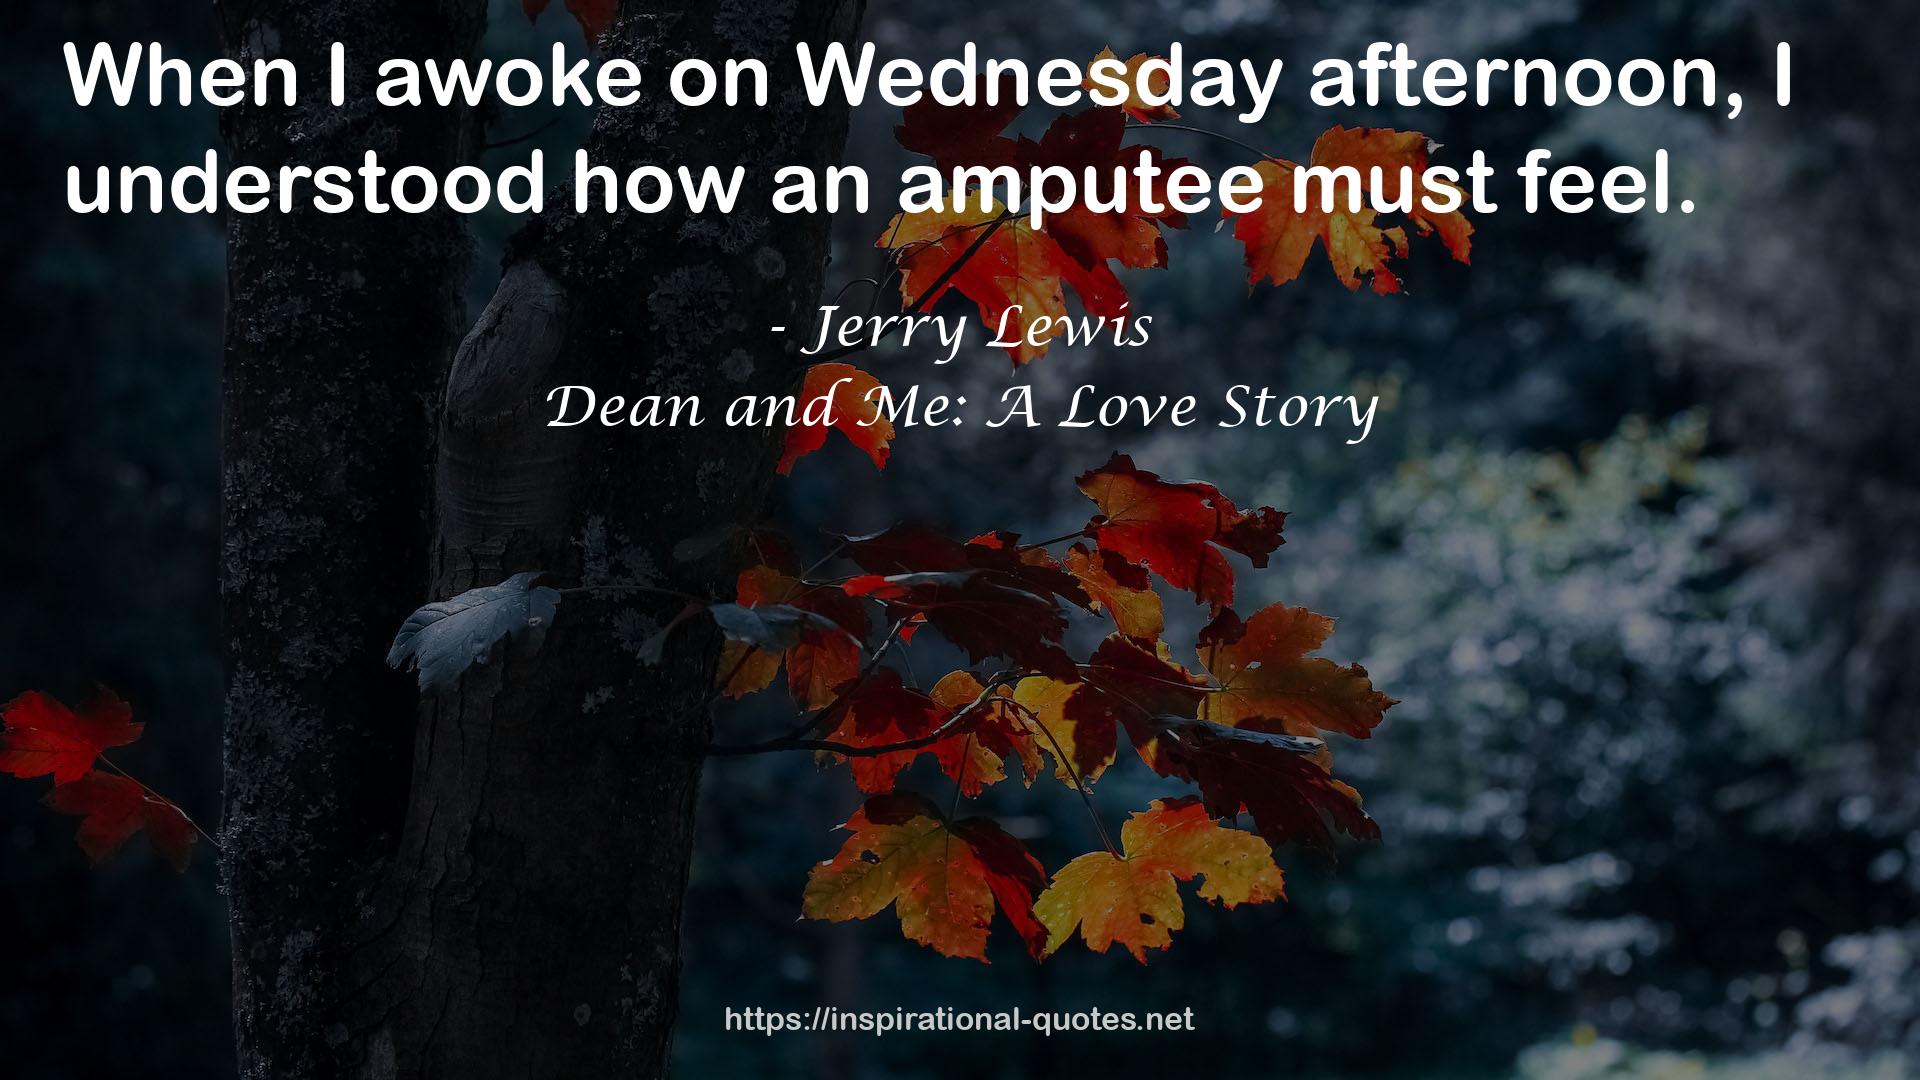 Dean and Me: A Love Story QUOTES